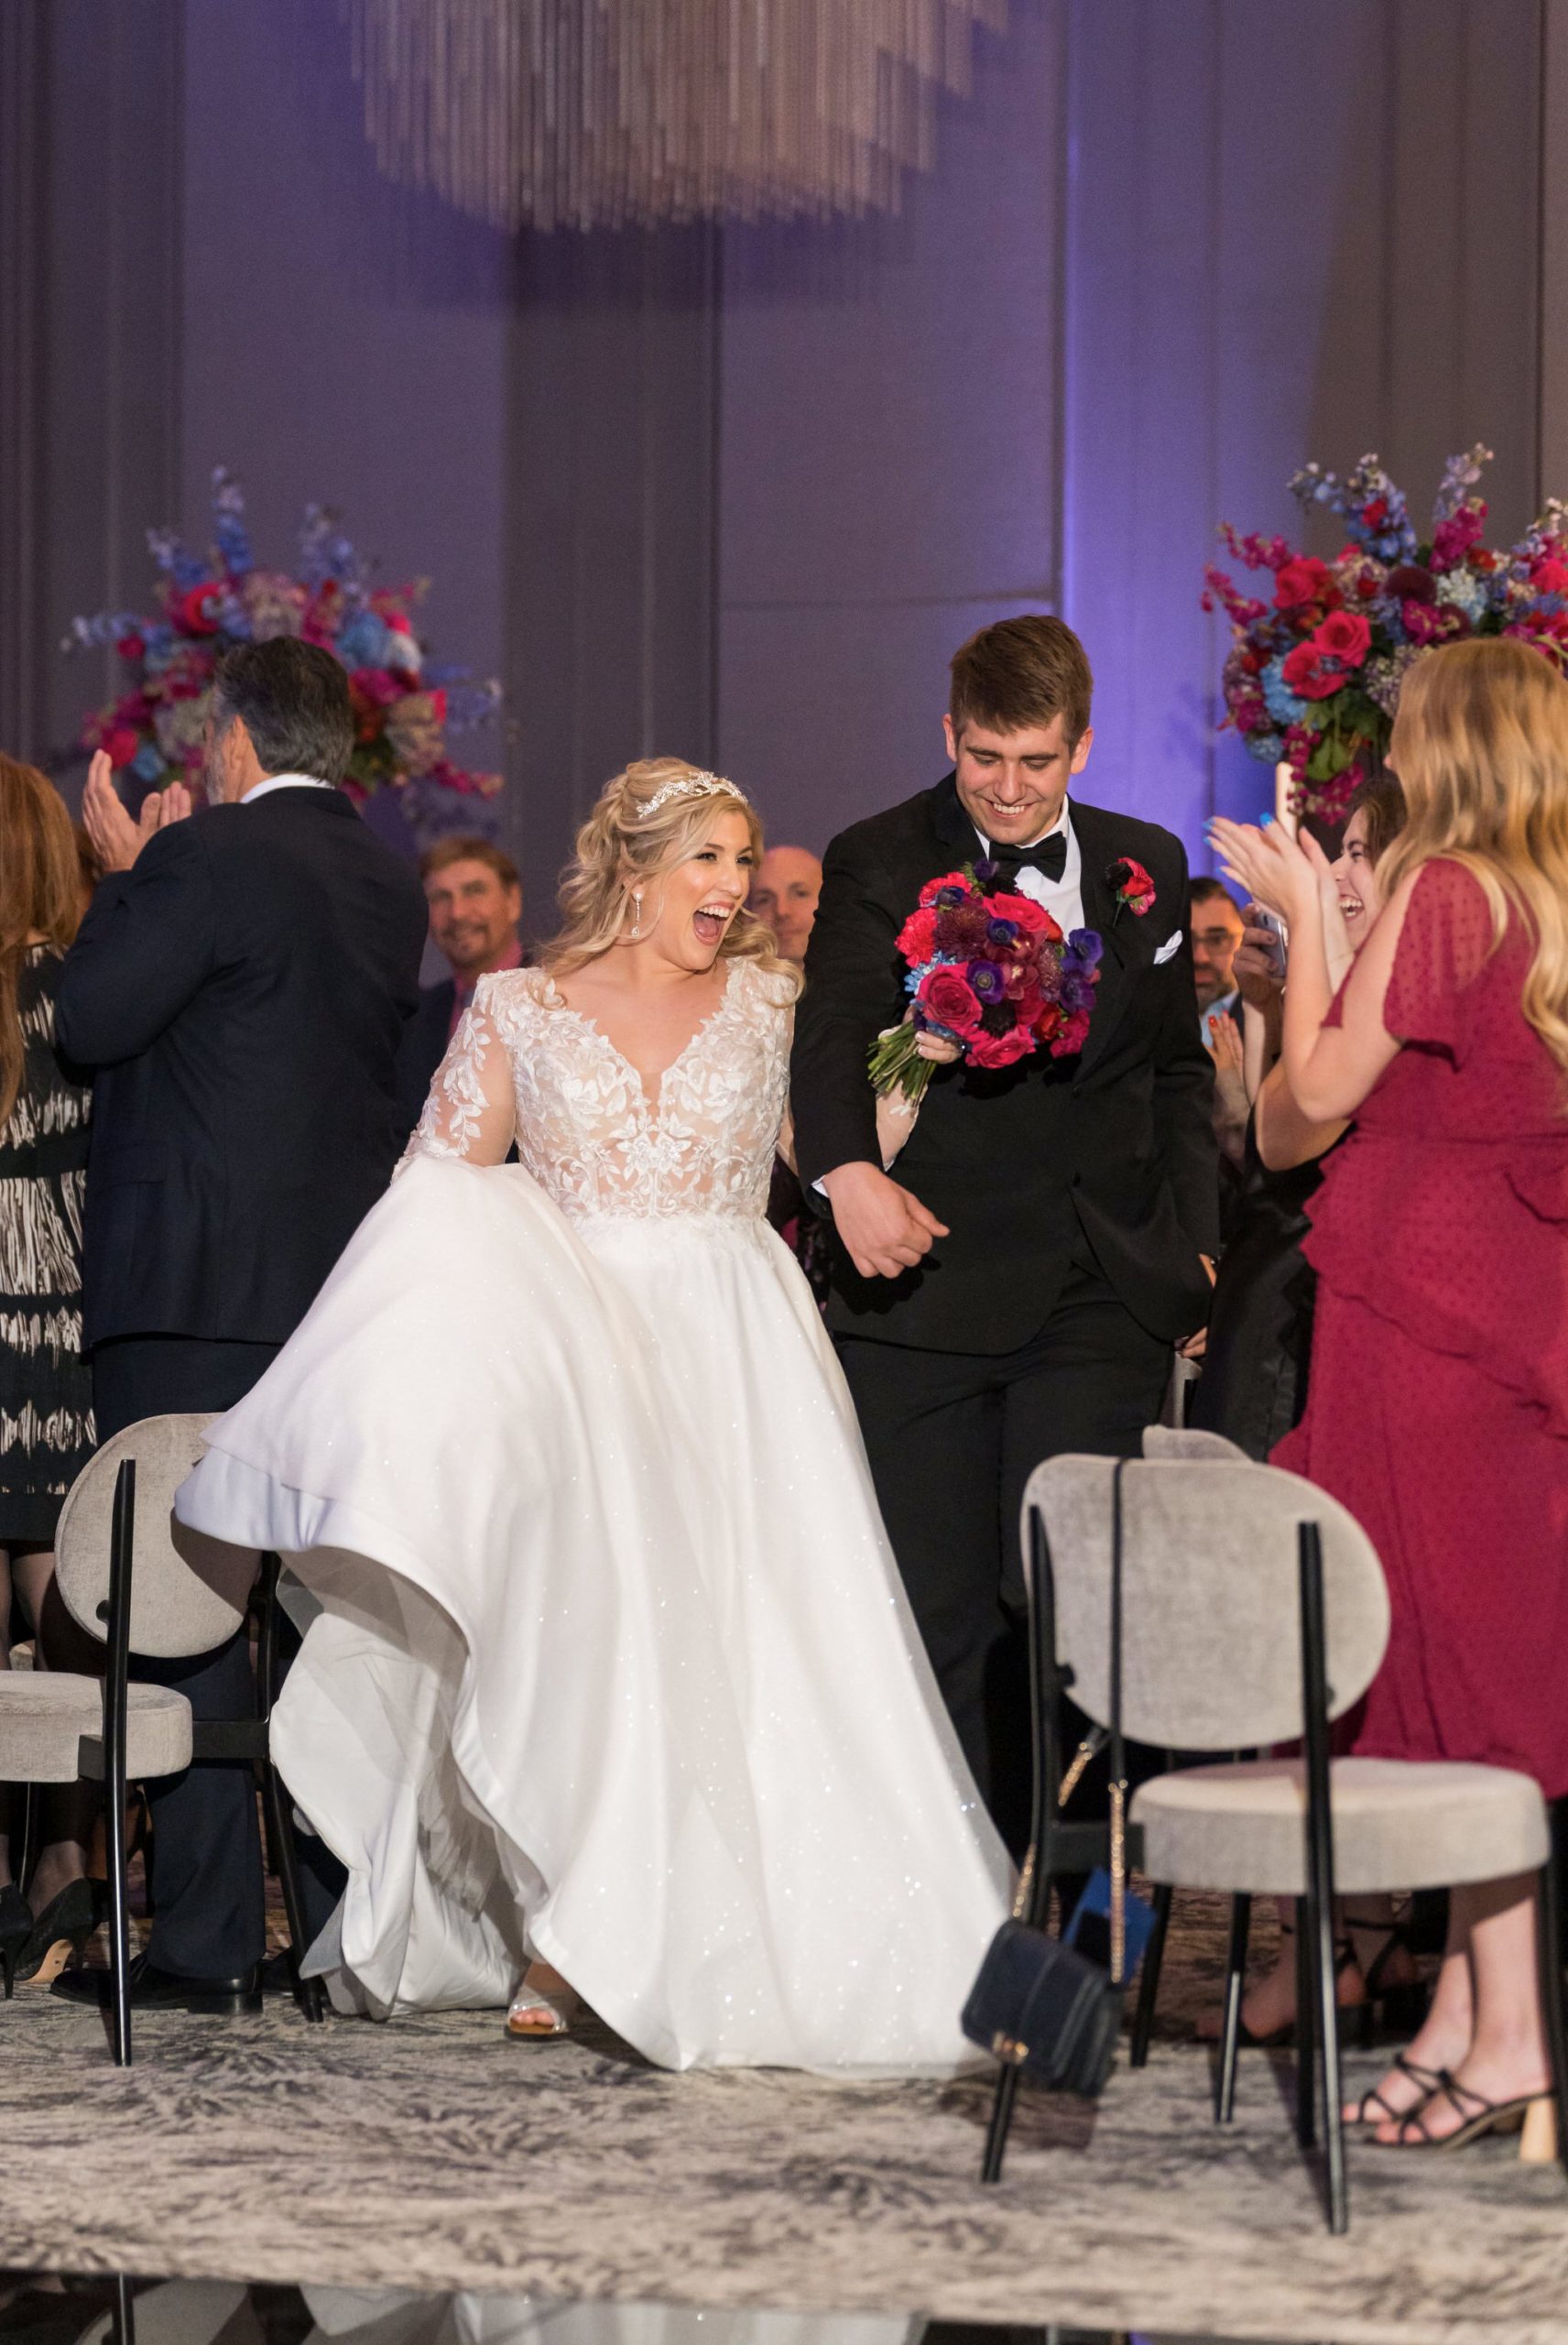 A bride and groom enter into the grand ballroom of their Daxton Hotel wedding.  